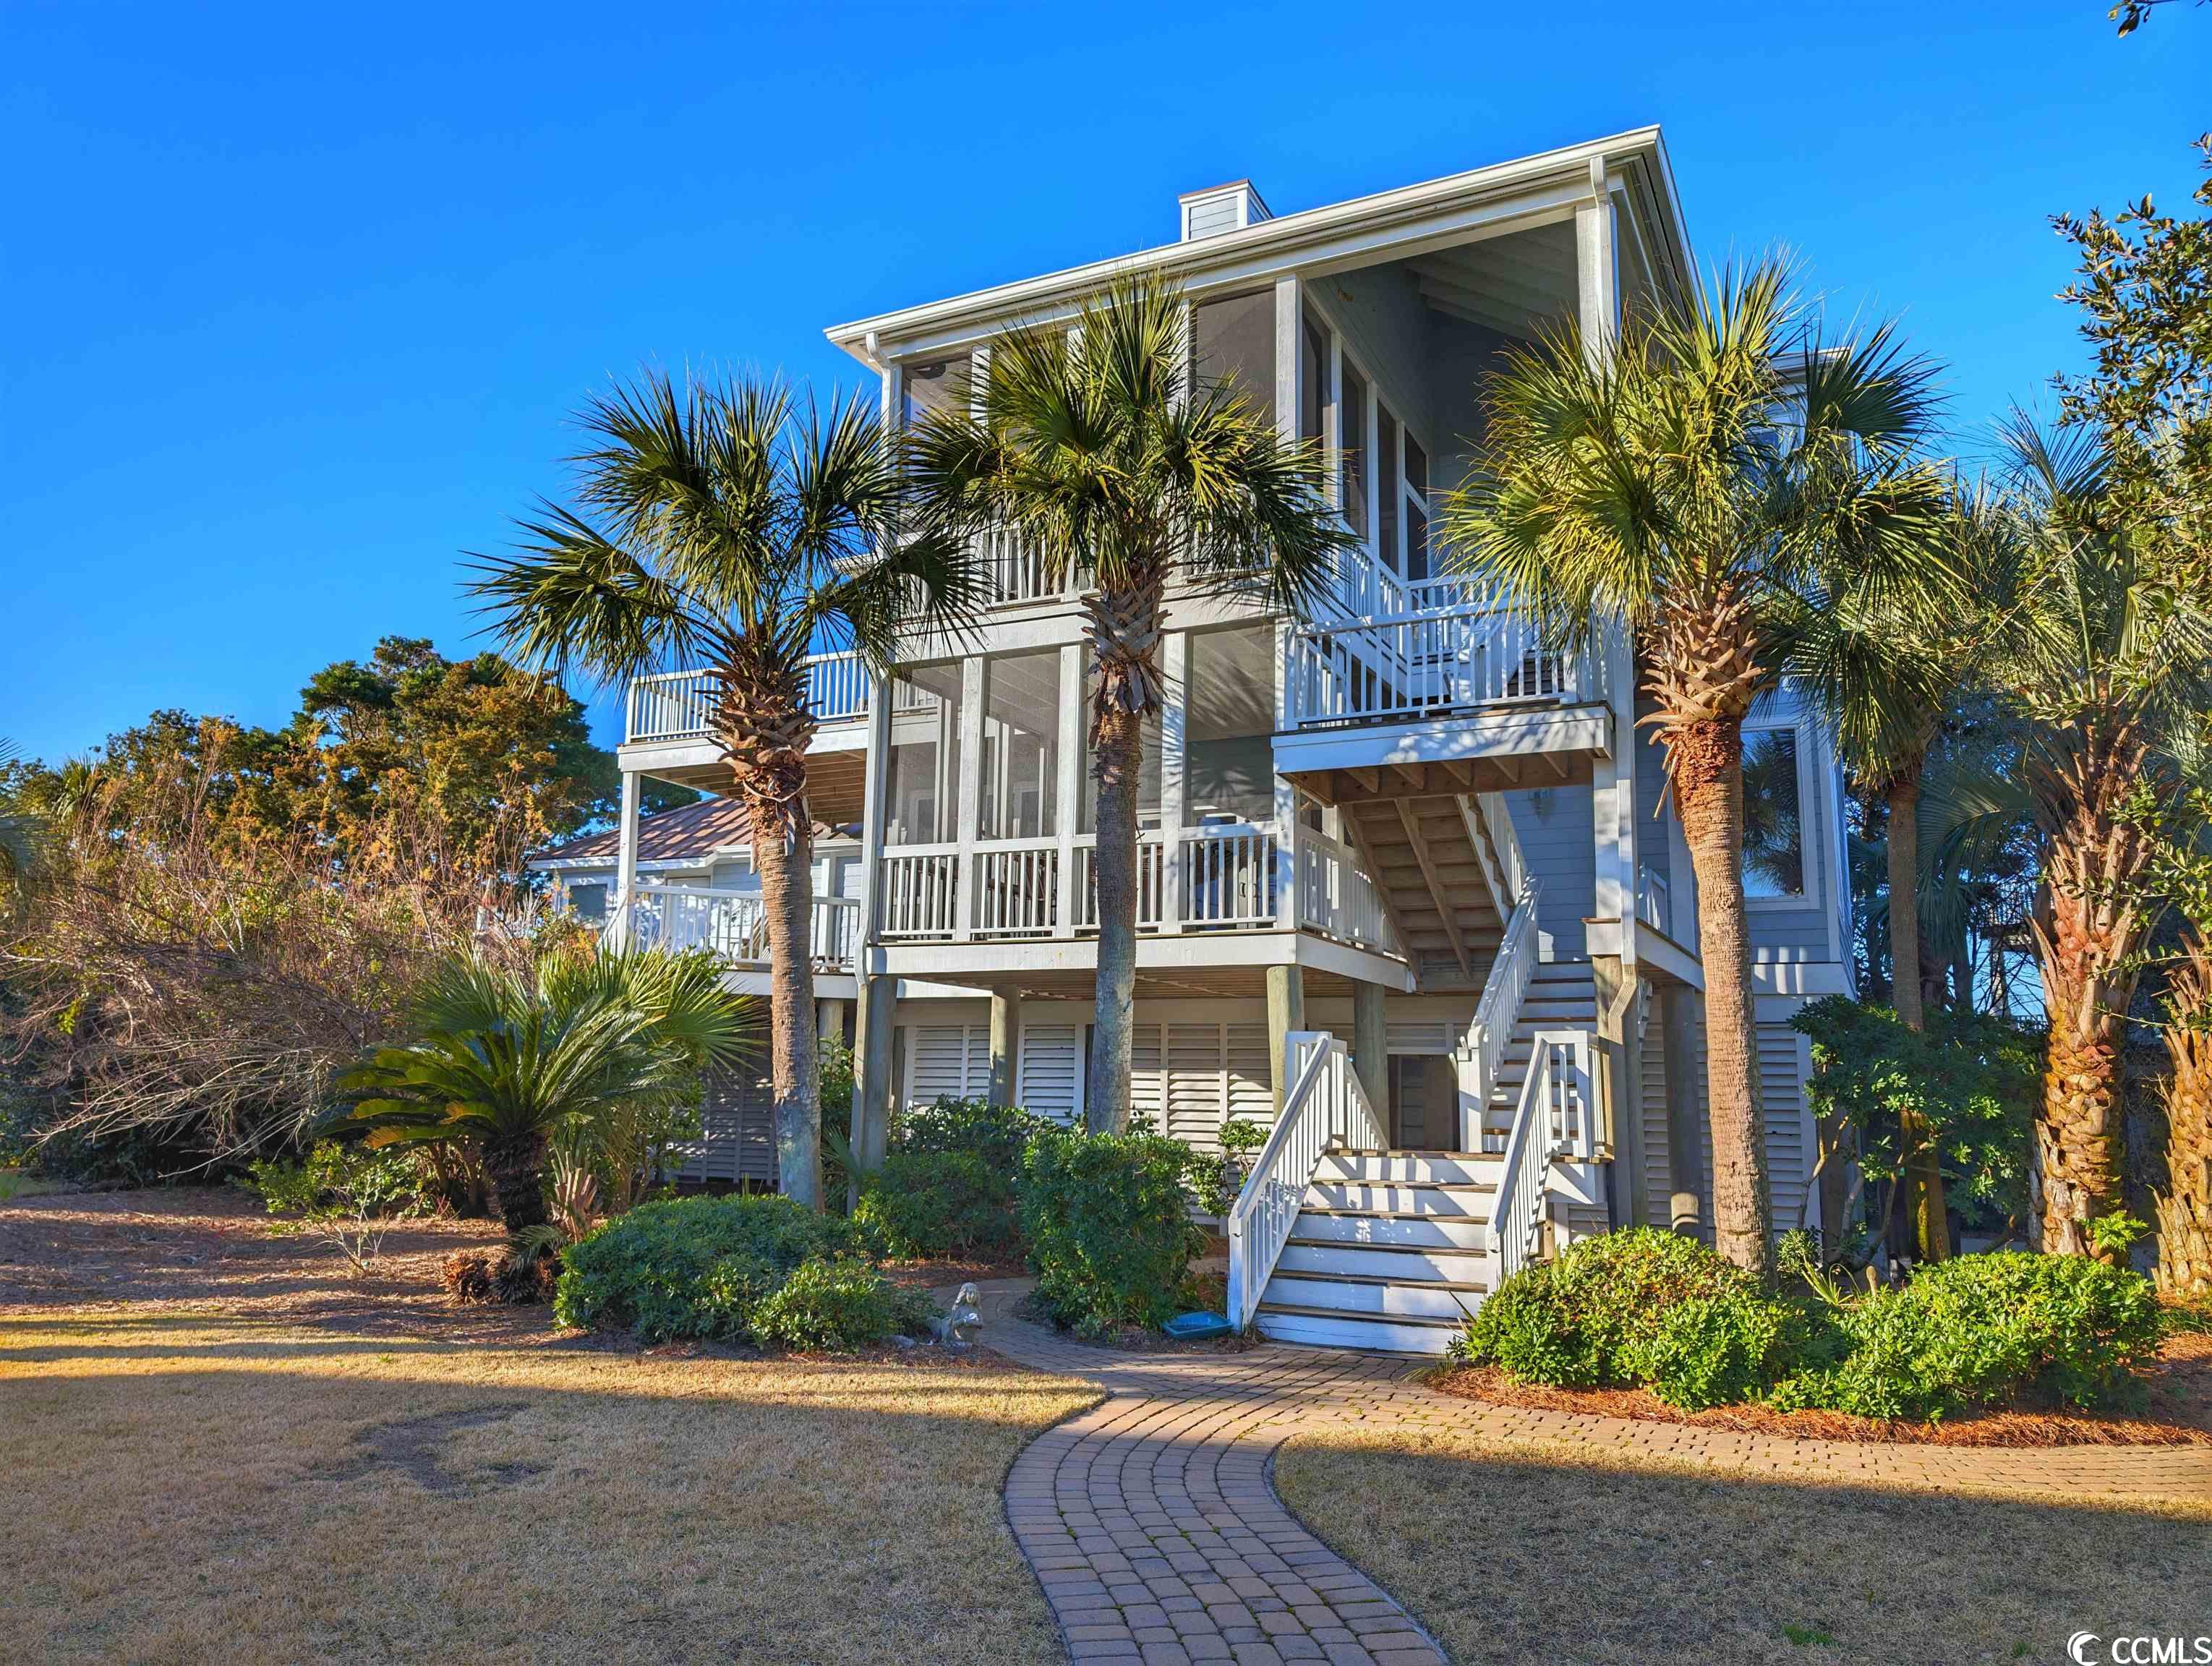 336 Inlet Point Dr. Pawleys Island, SC 29585